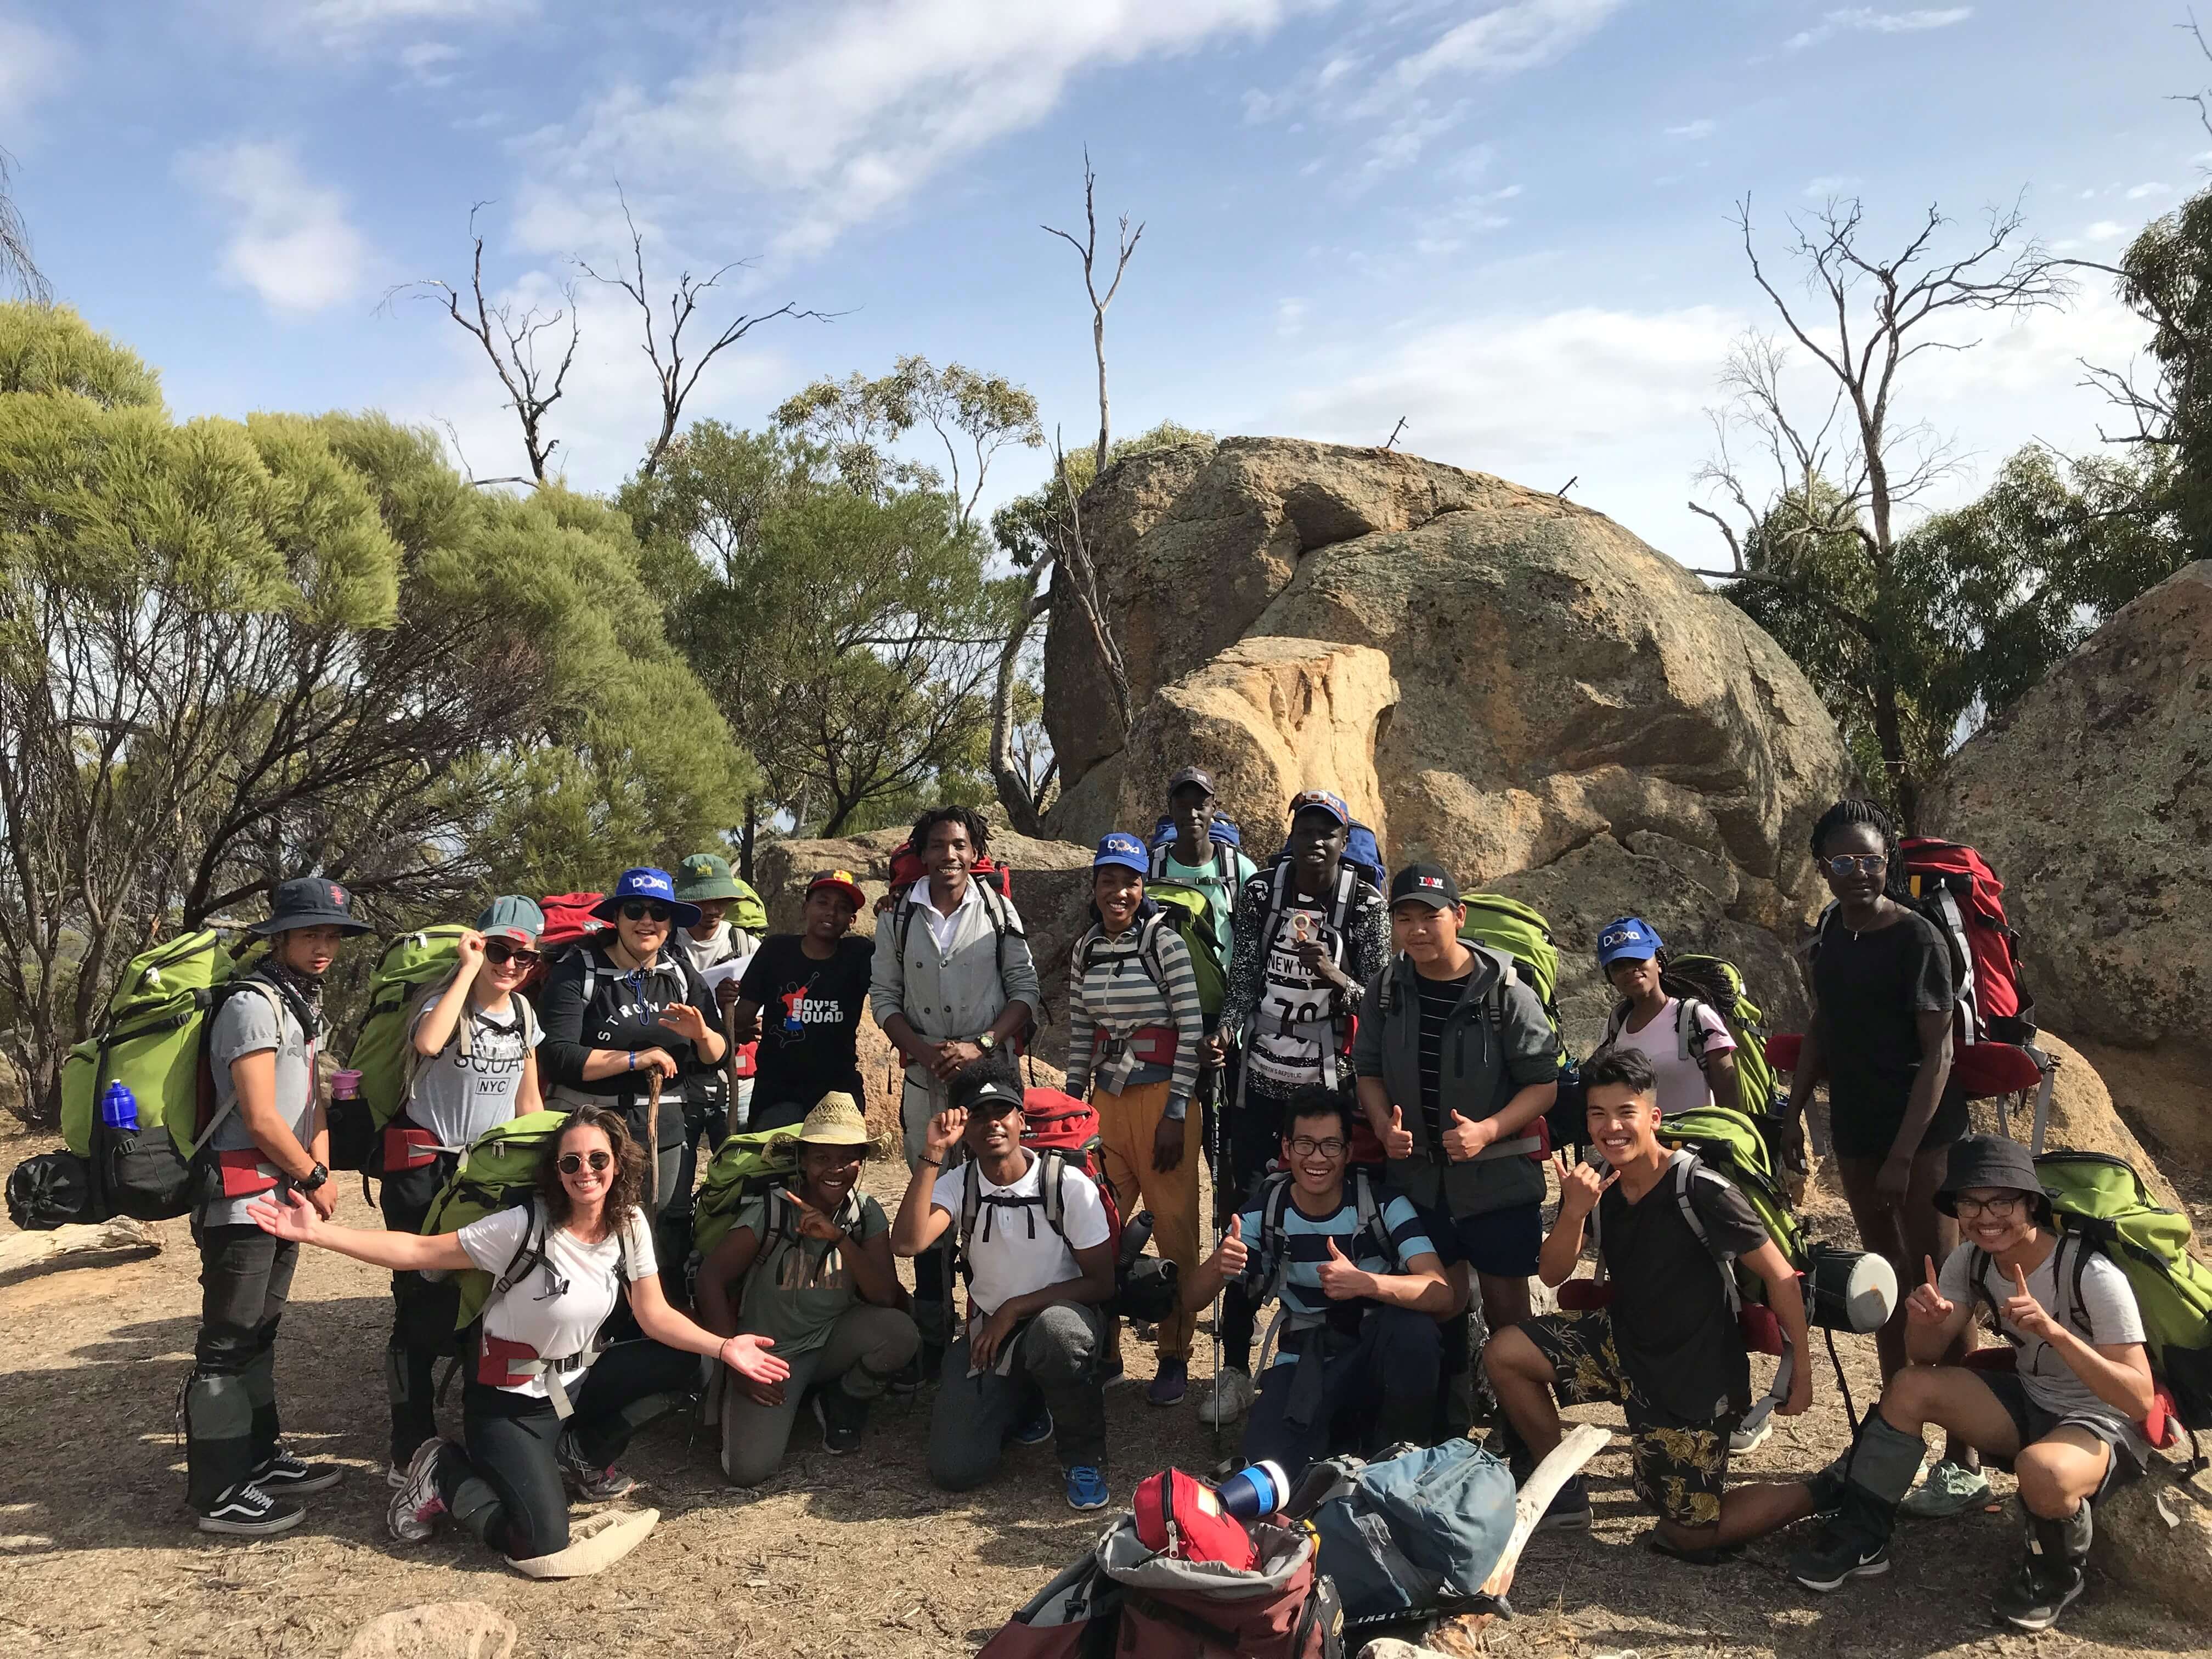 Young adventurers connect and gain confidence